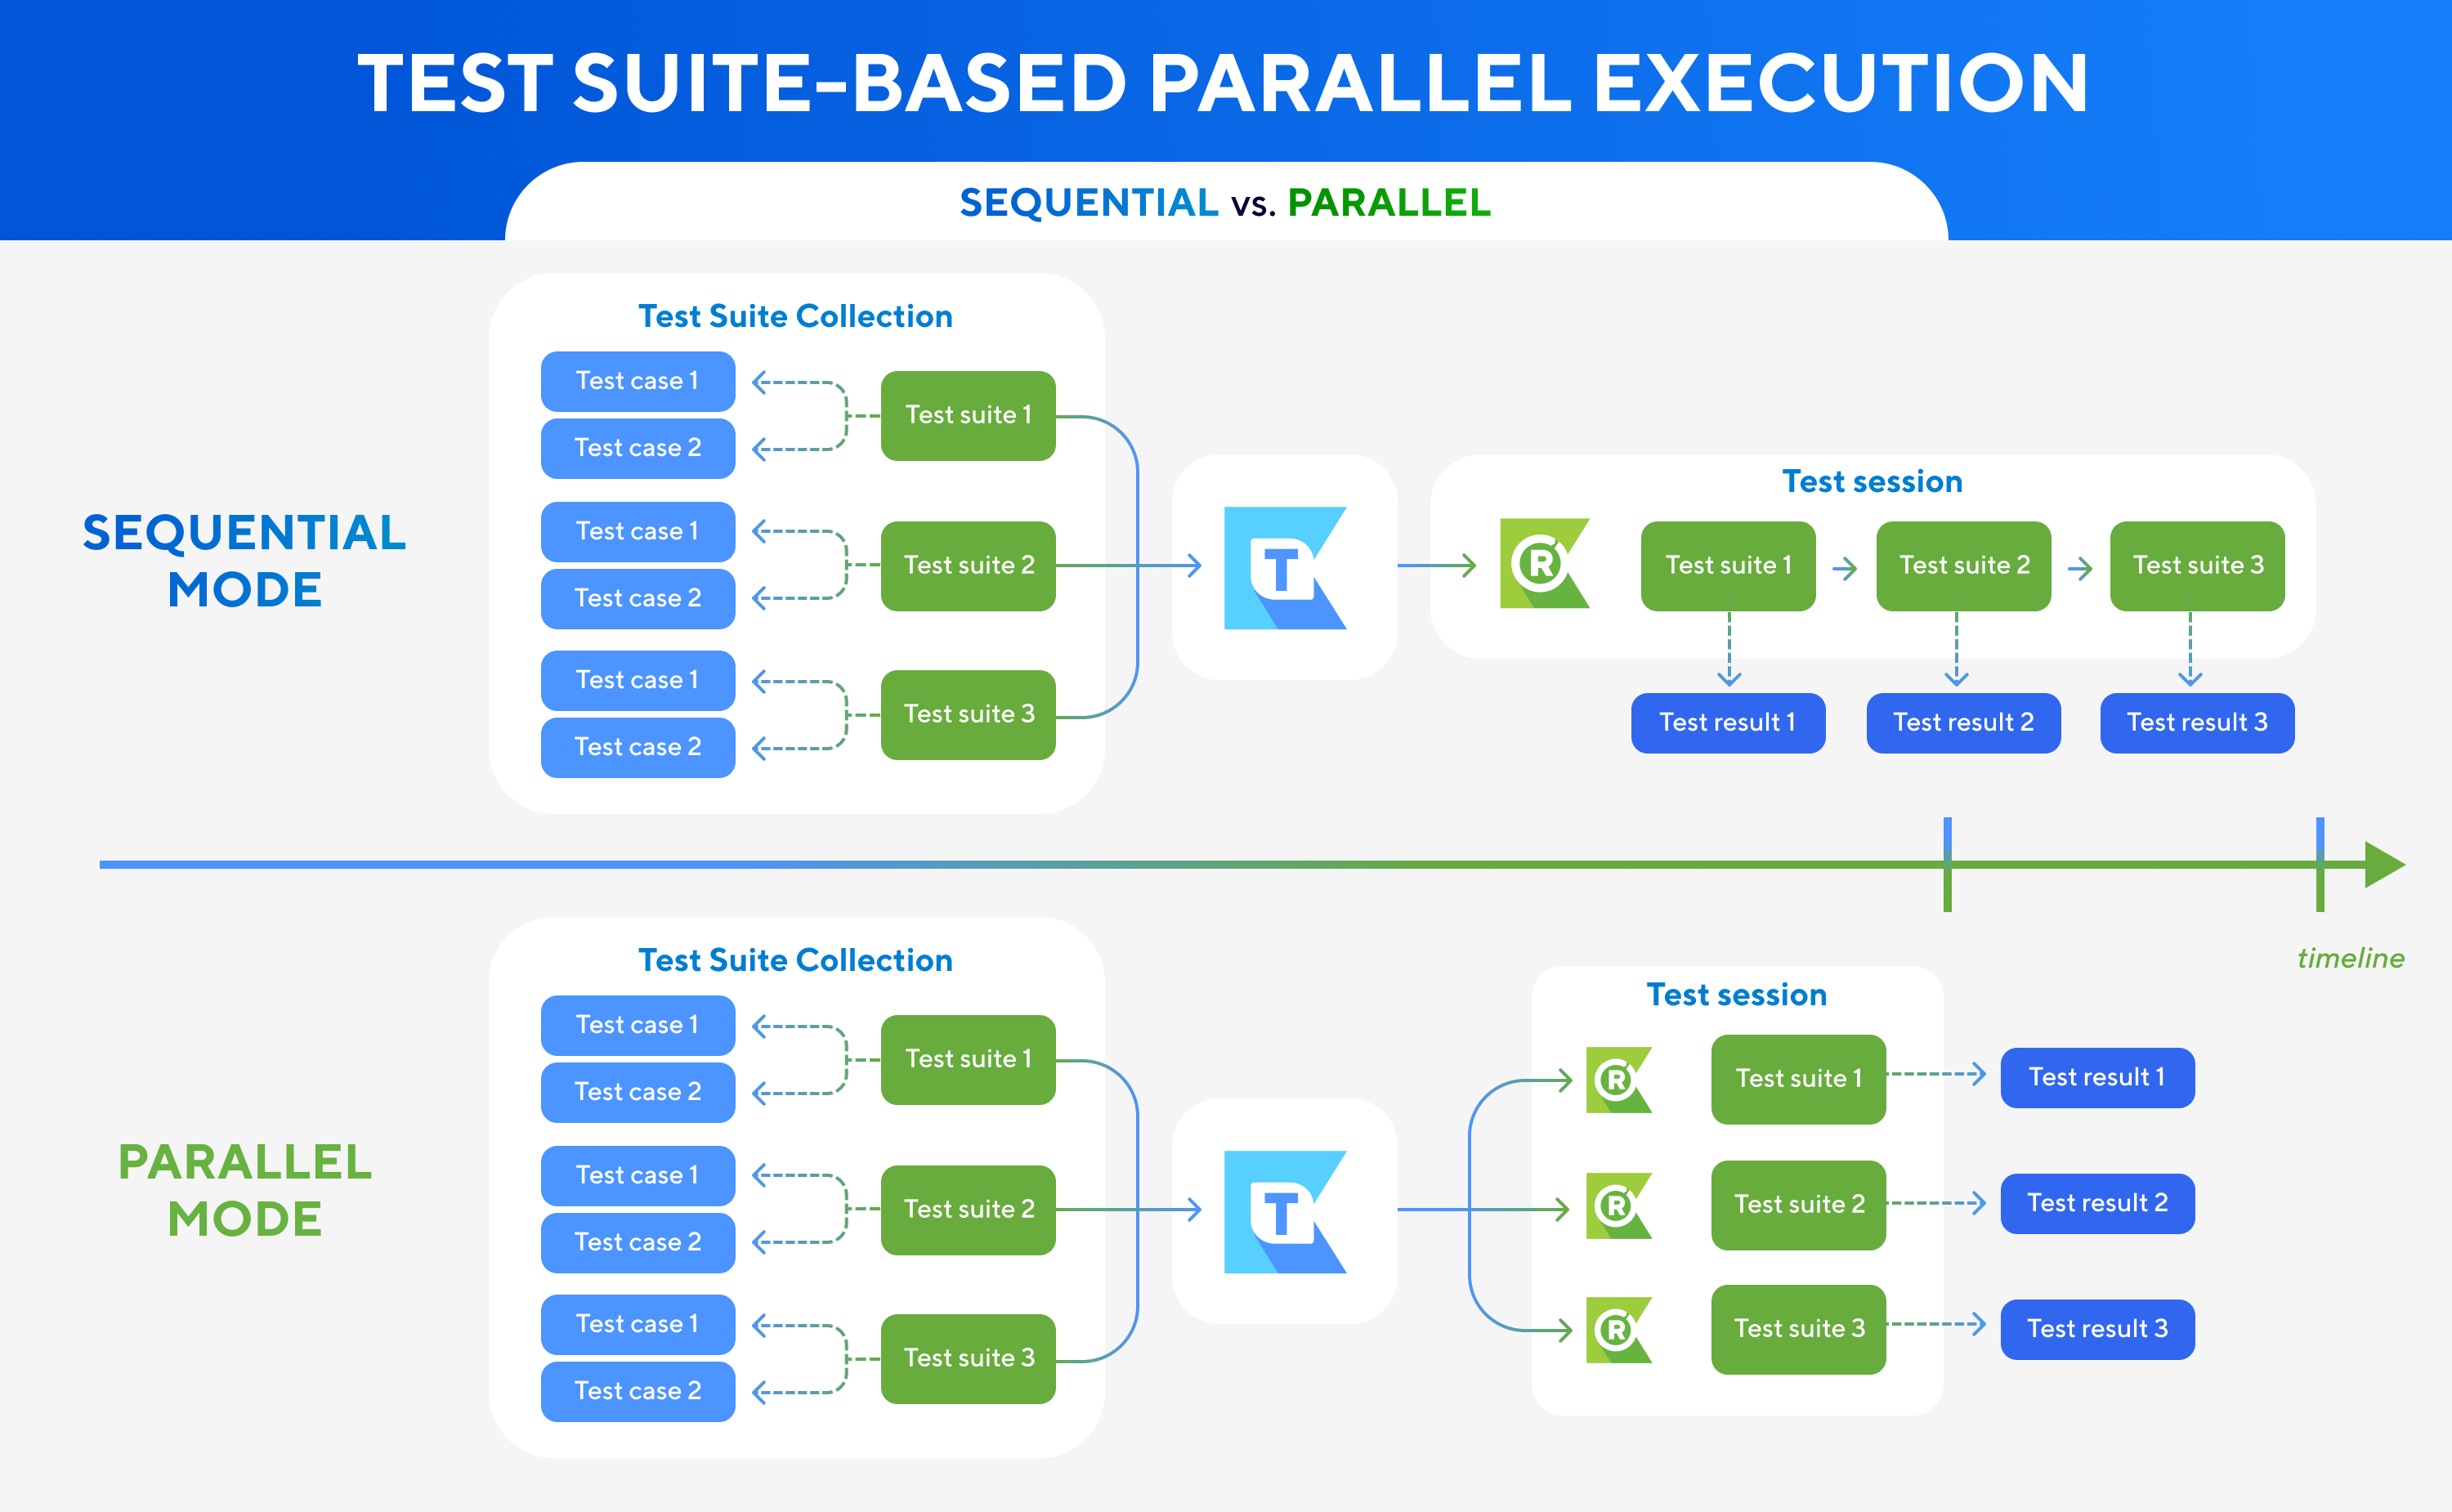 Test Suite-Based Parallel Execution